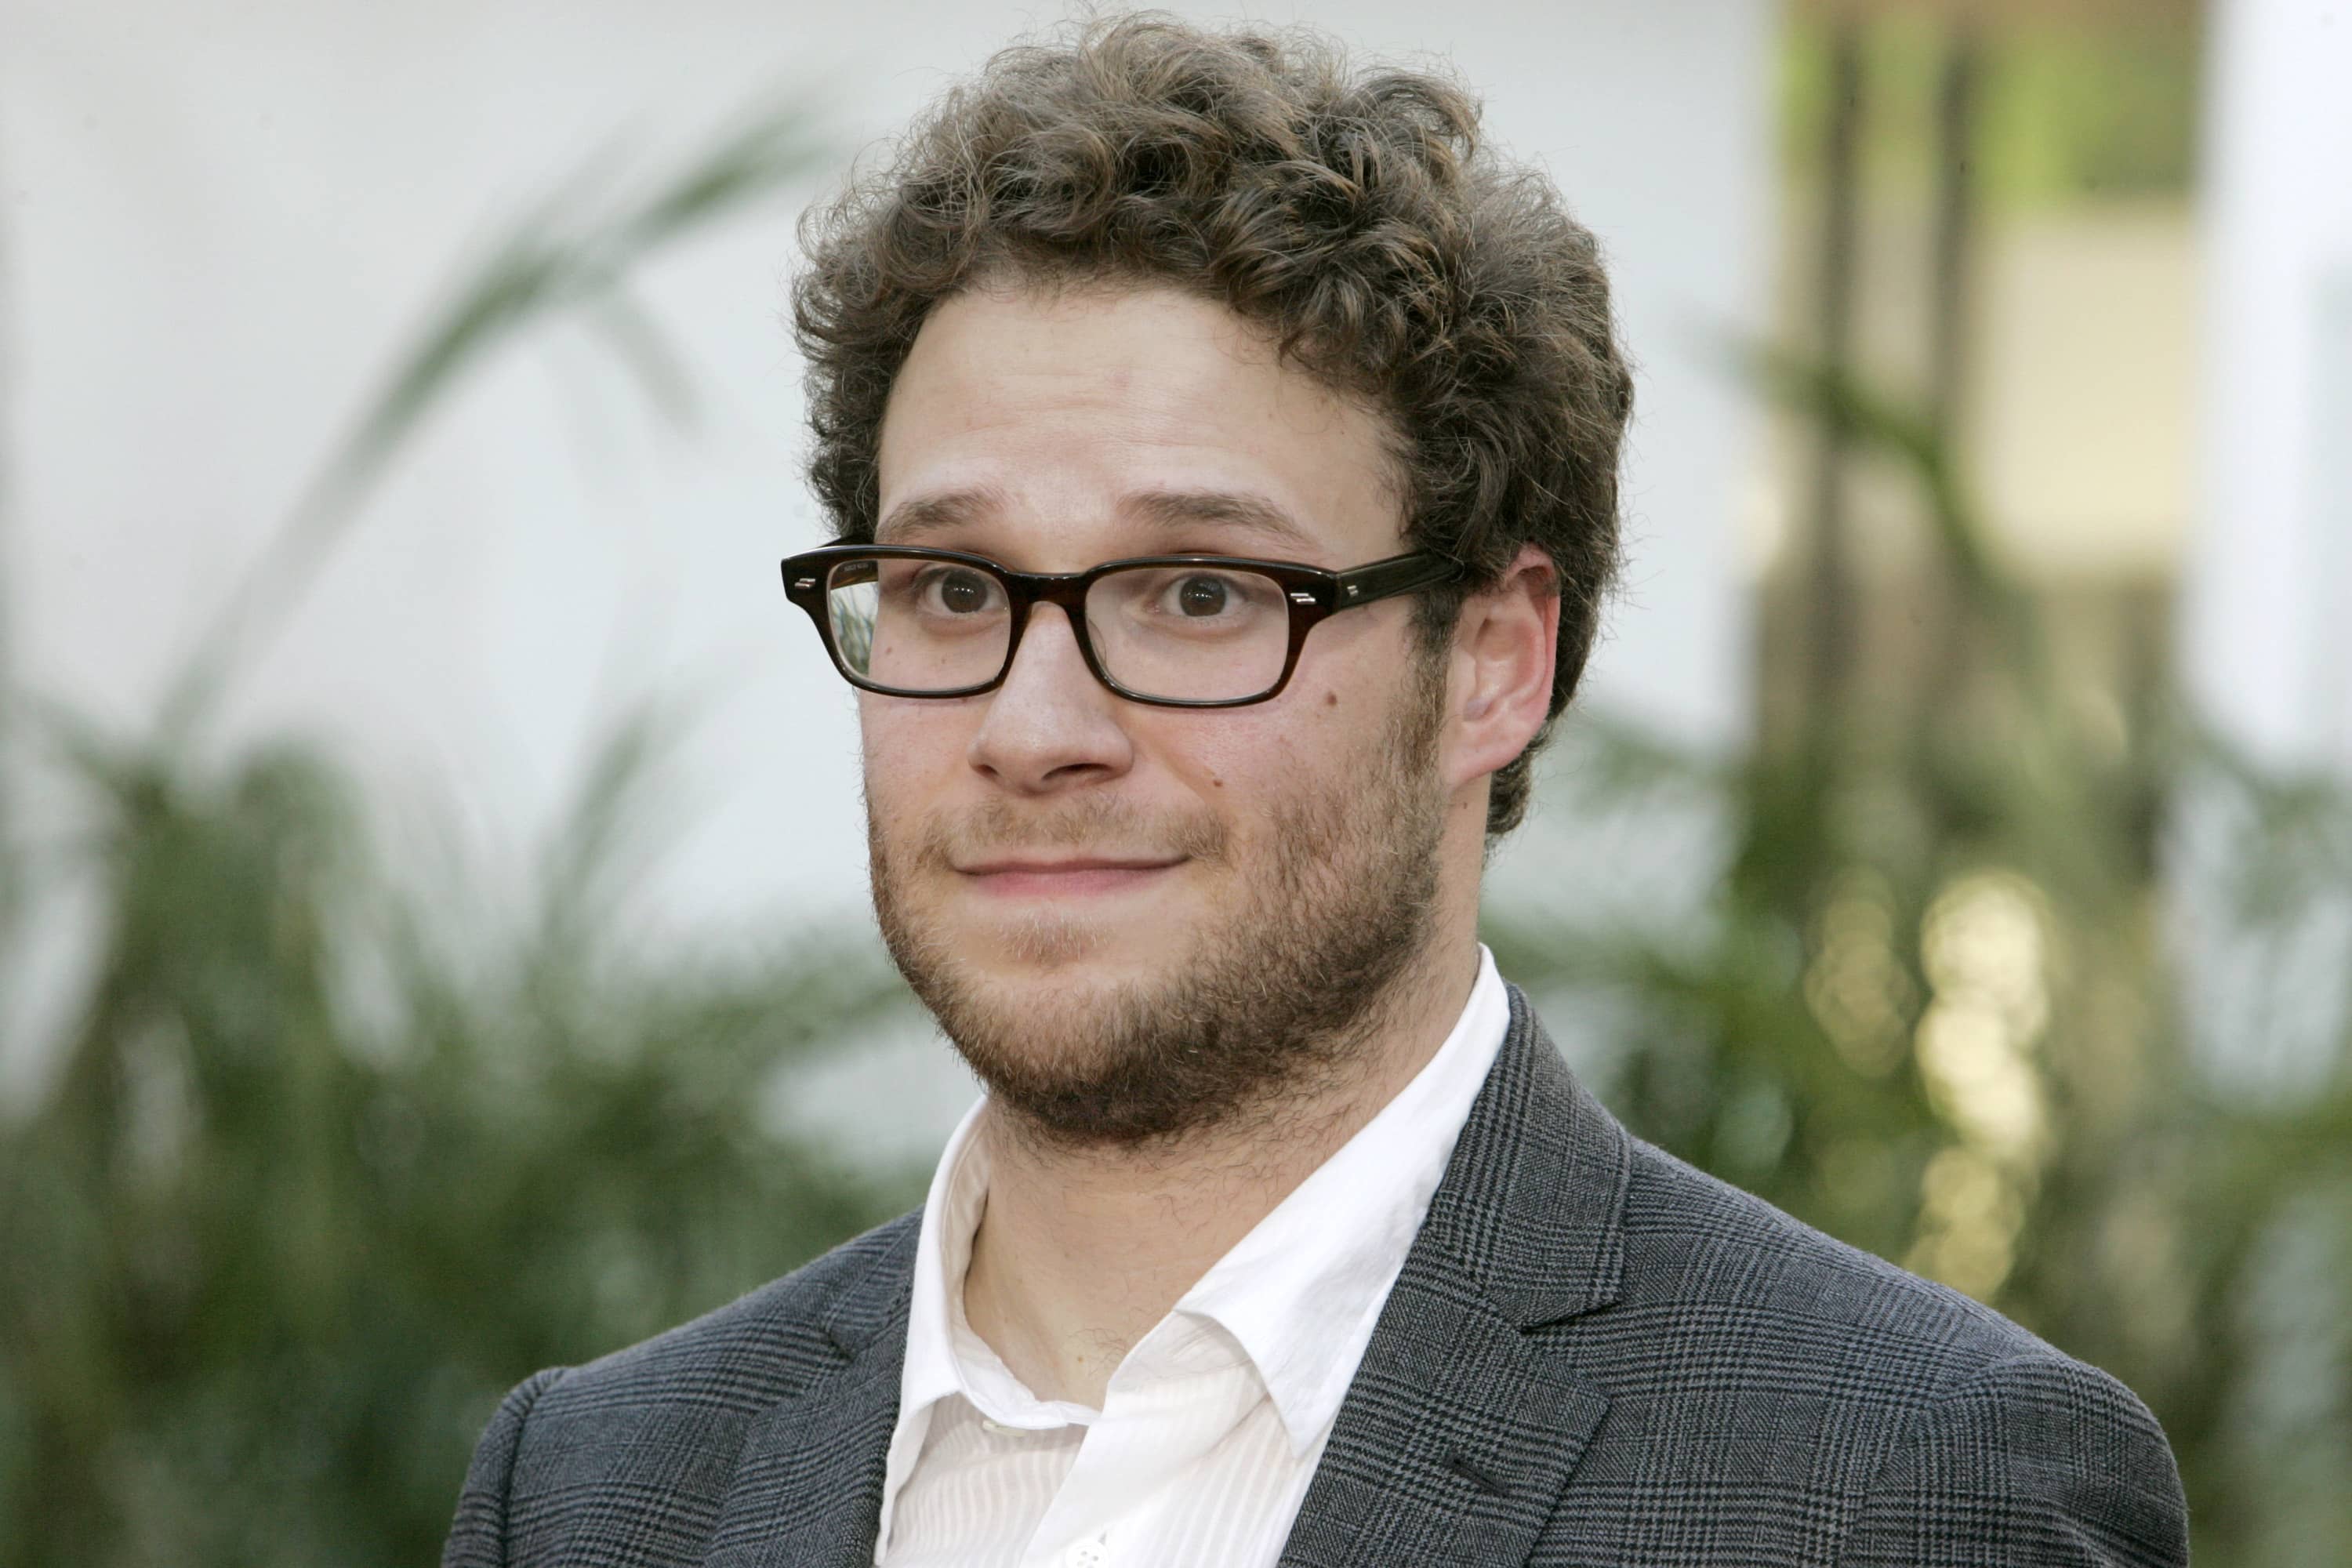 actor-seth-rogen-poses-at-the-premiere-of-the-comedy-film-funny-people-in-hollywood